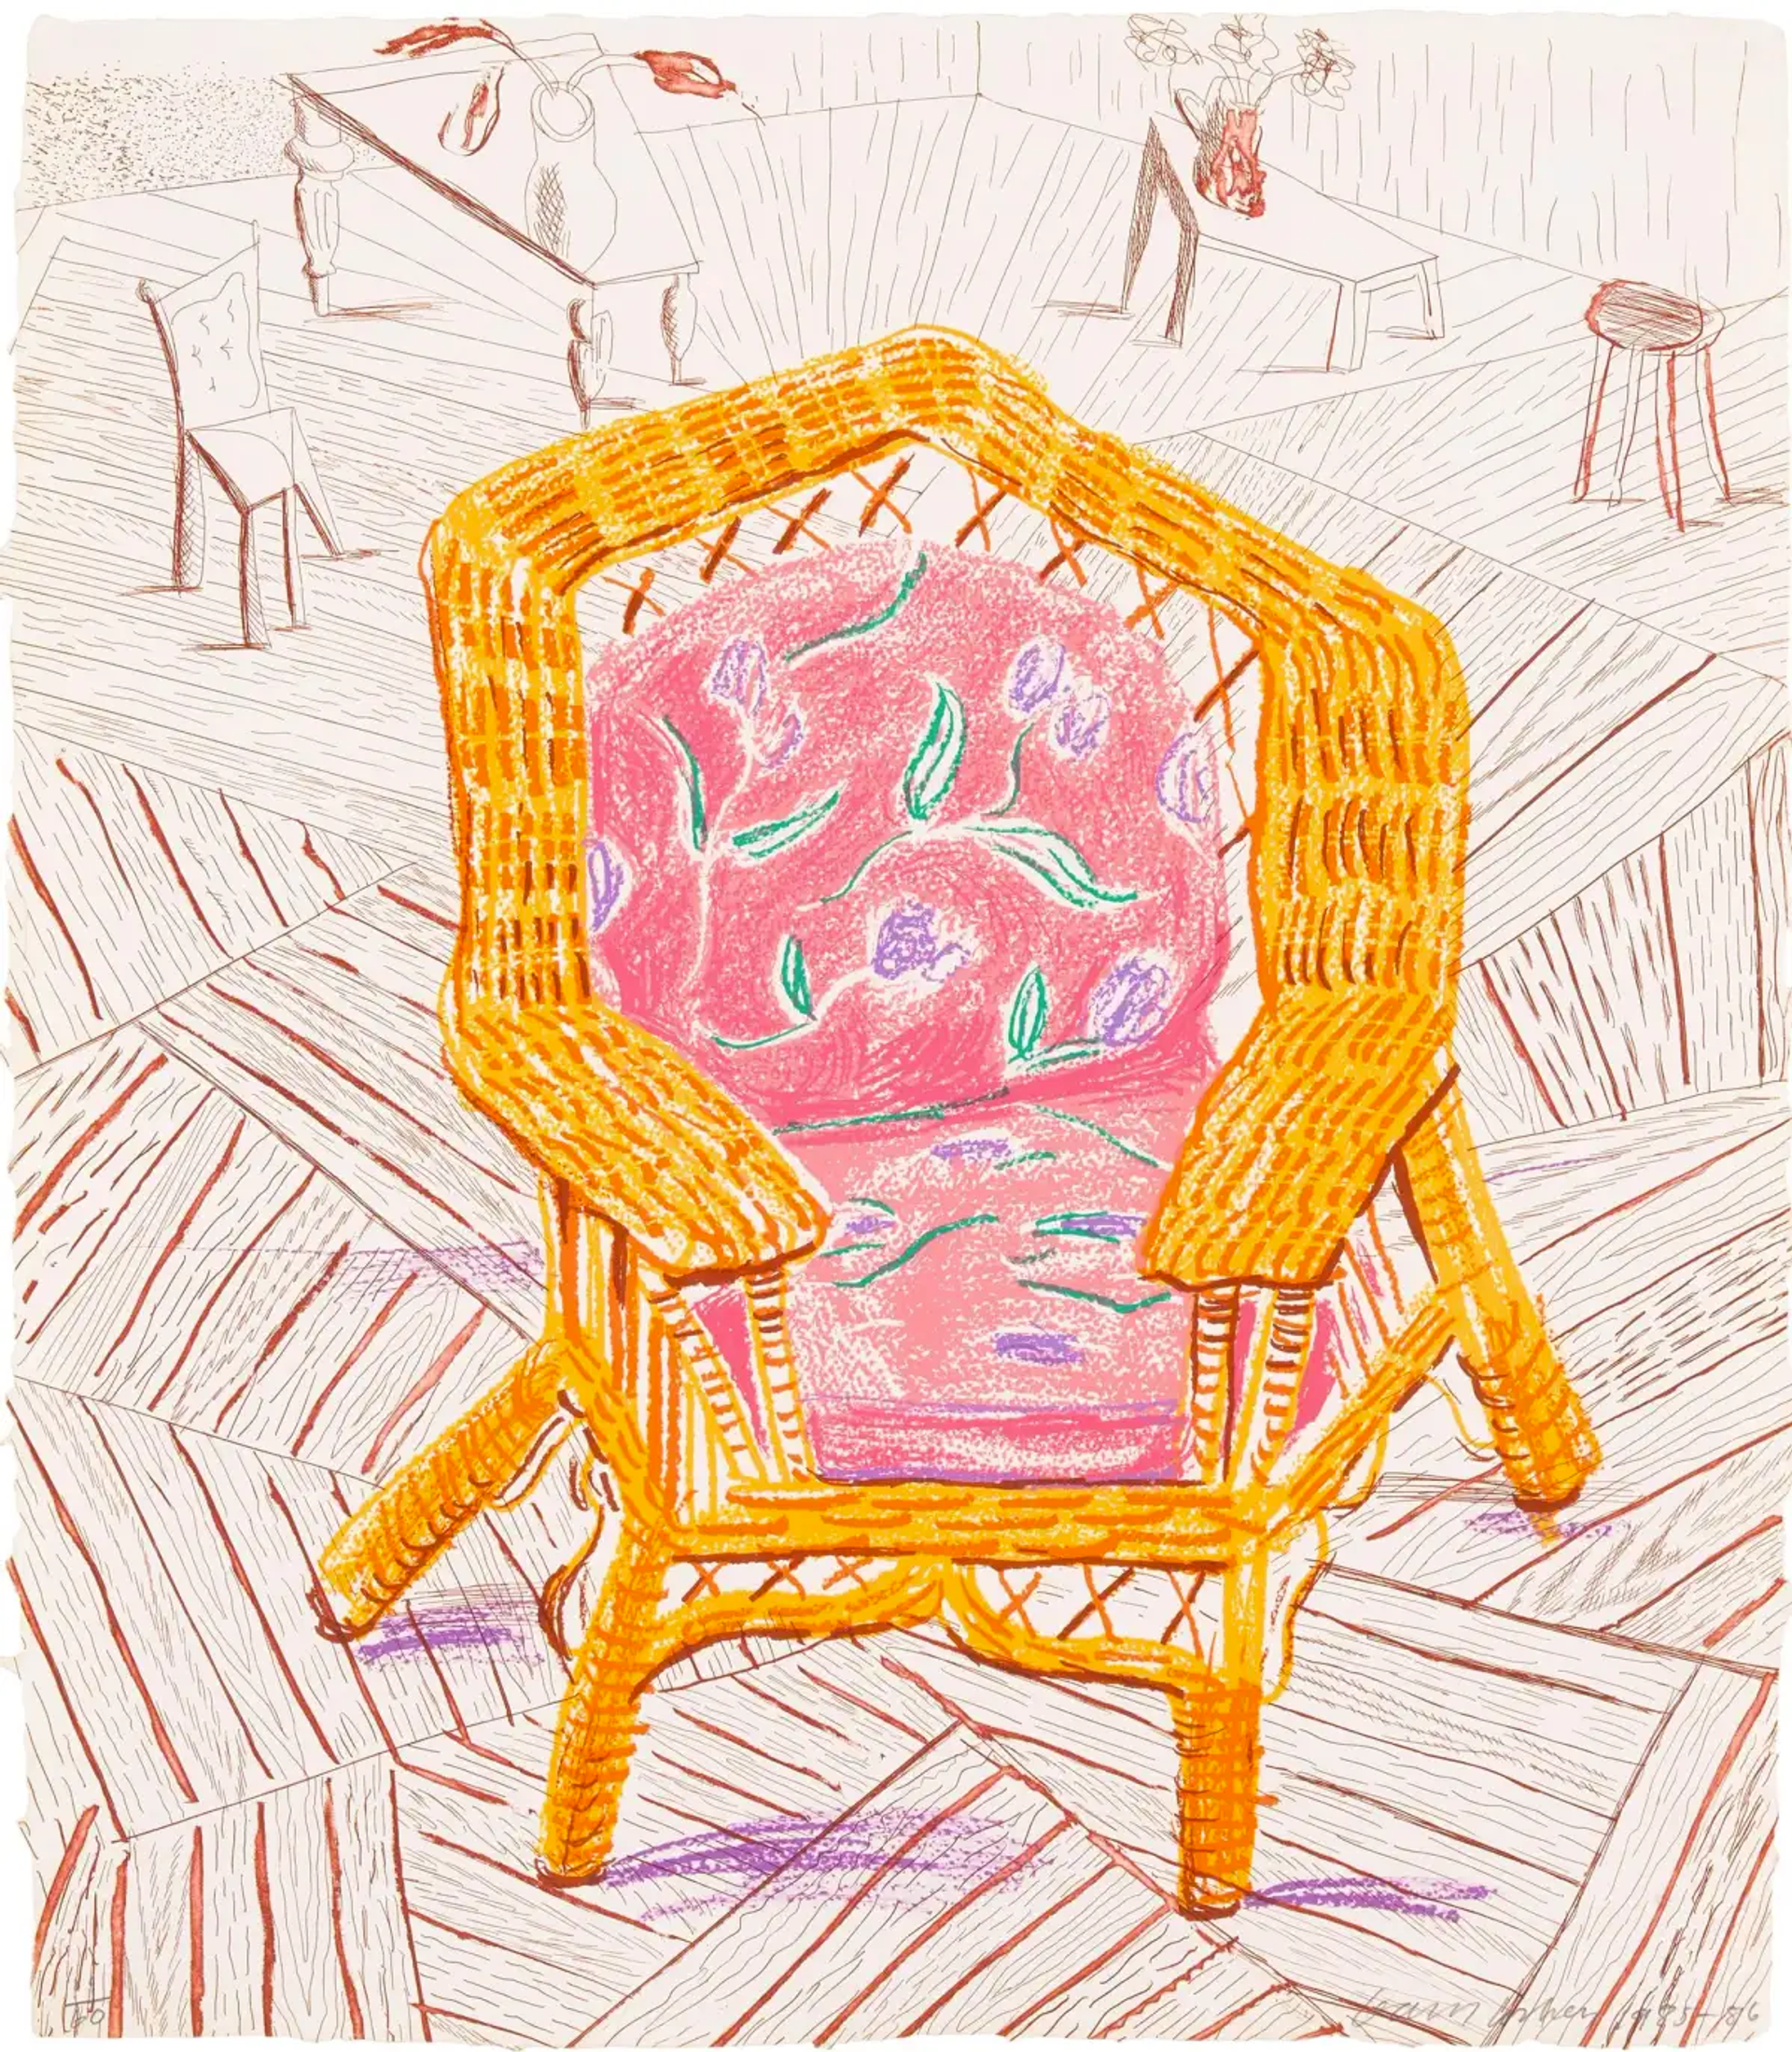  In Number One Chair we find a wicker chair of the kind you might find in a conservatory, topped with a pink cushion covered in floral pattern. The texture of the chair is heightened by its setting on floorboards which appear to have been cut up and rearranged so that they meet at crazed angles, adding a sense of unease and movement to the scene. In the background more furniture recedes into the distance, picked out with simple lines and playing second fiddle to the ‘Number One Chair’ which has been lovingly drawn in detail and coloured a vibrant yellow. 